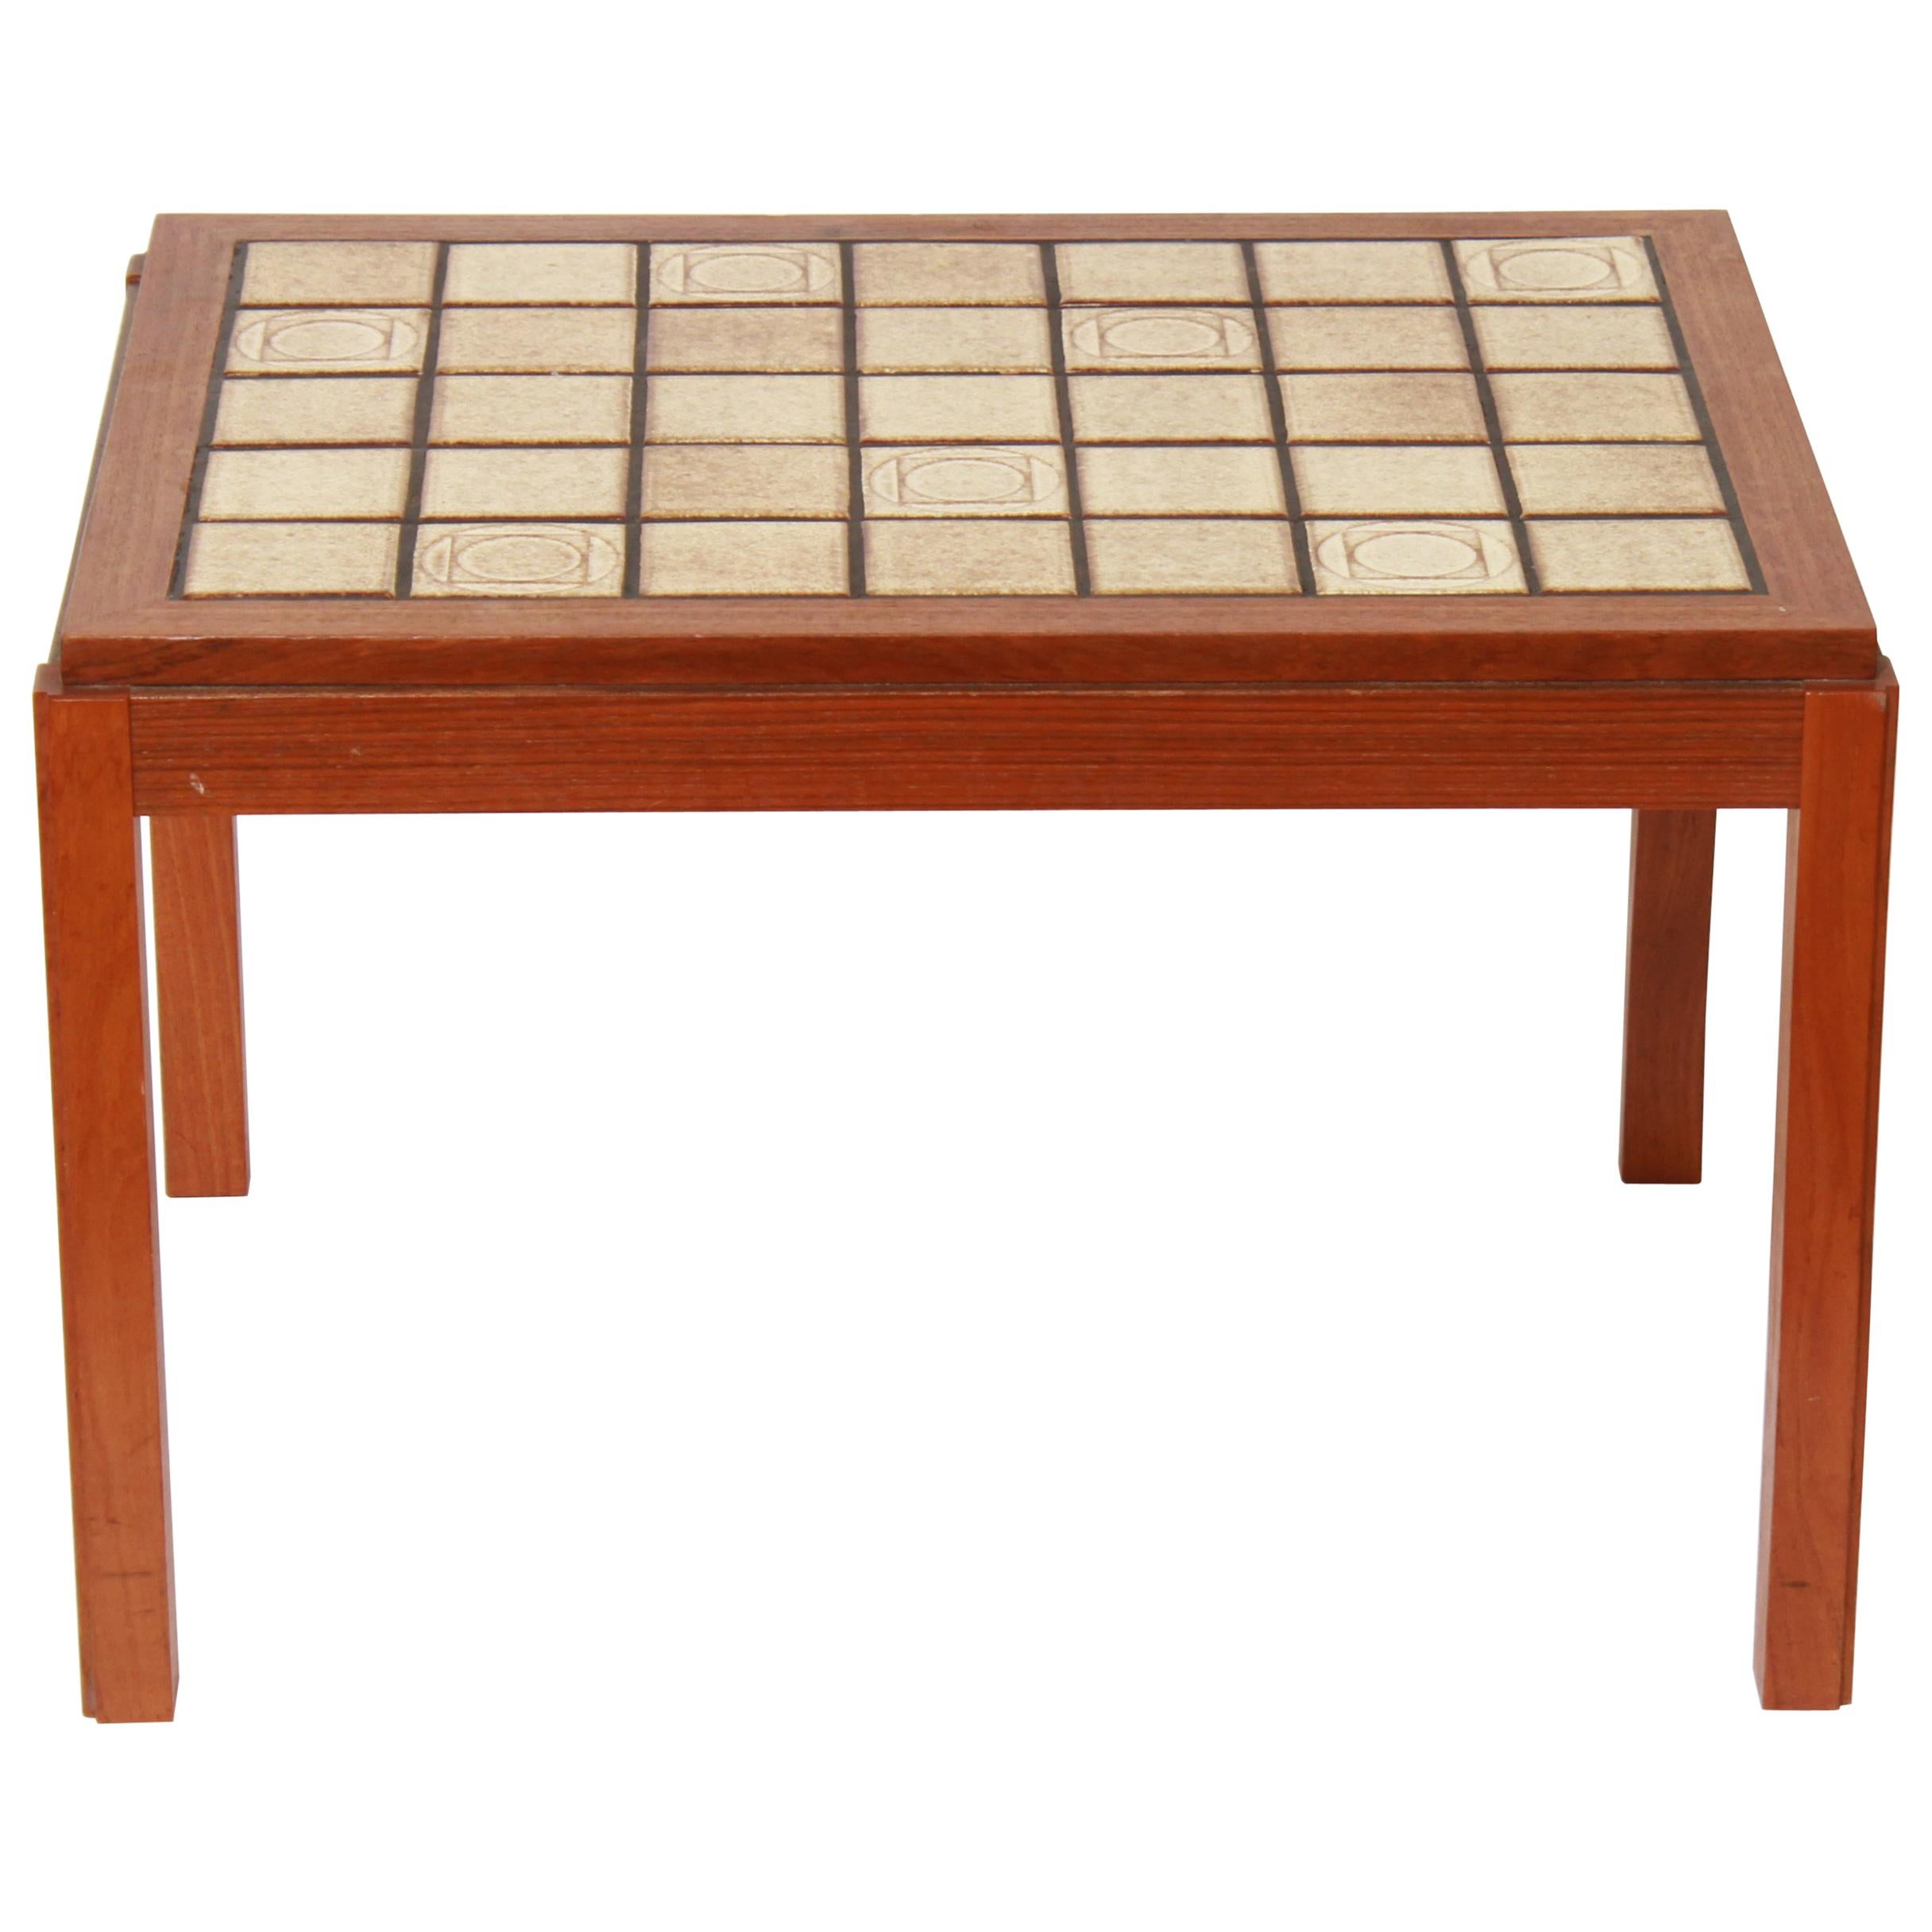 Mid-Century Modern Side Table with Tiled Top in Roger Capron Style